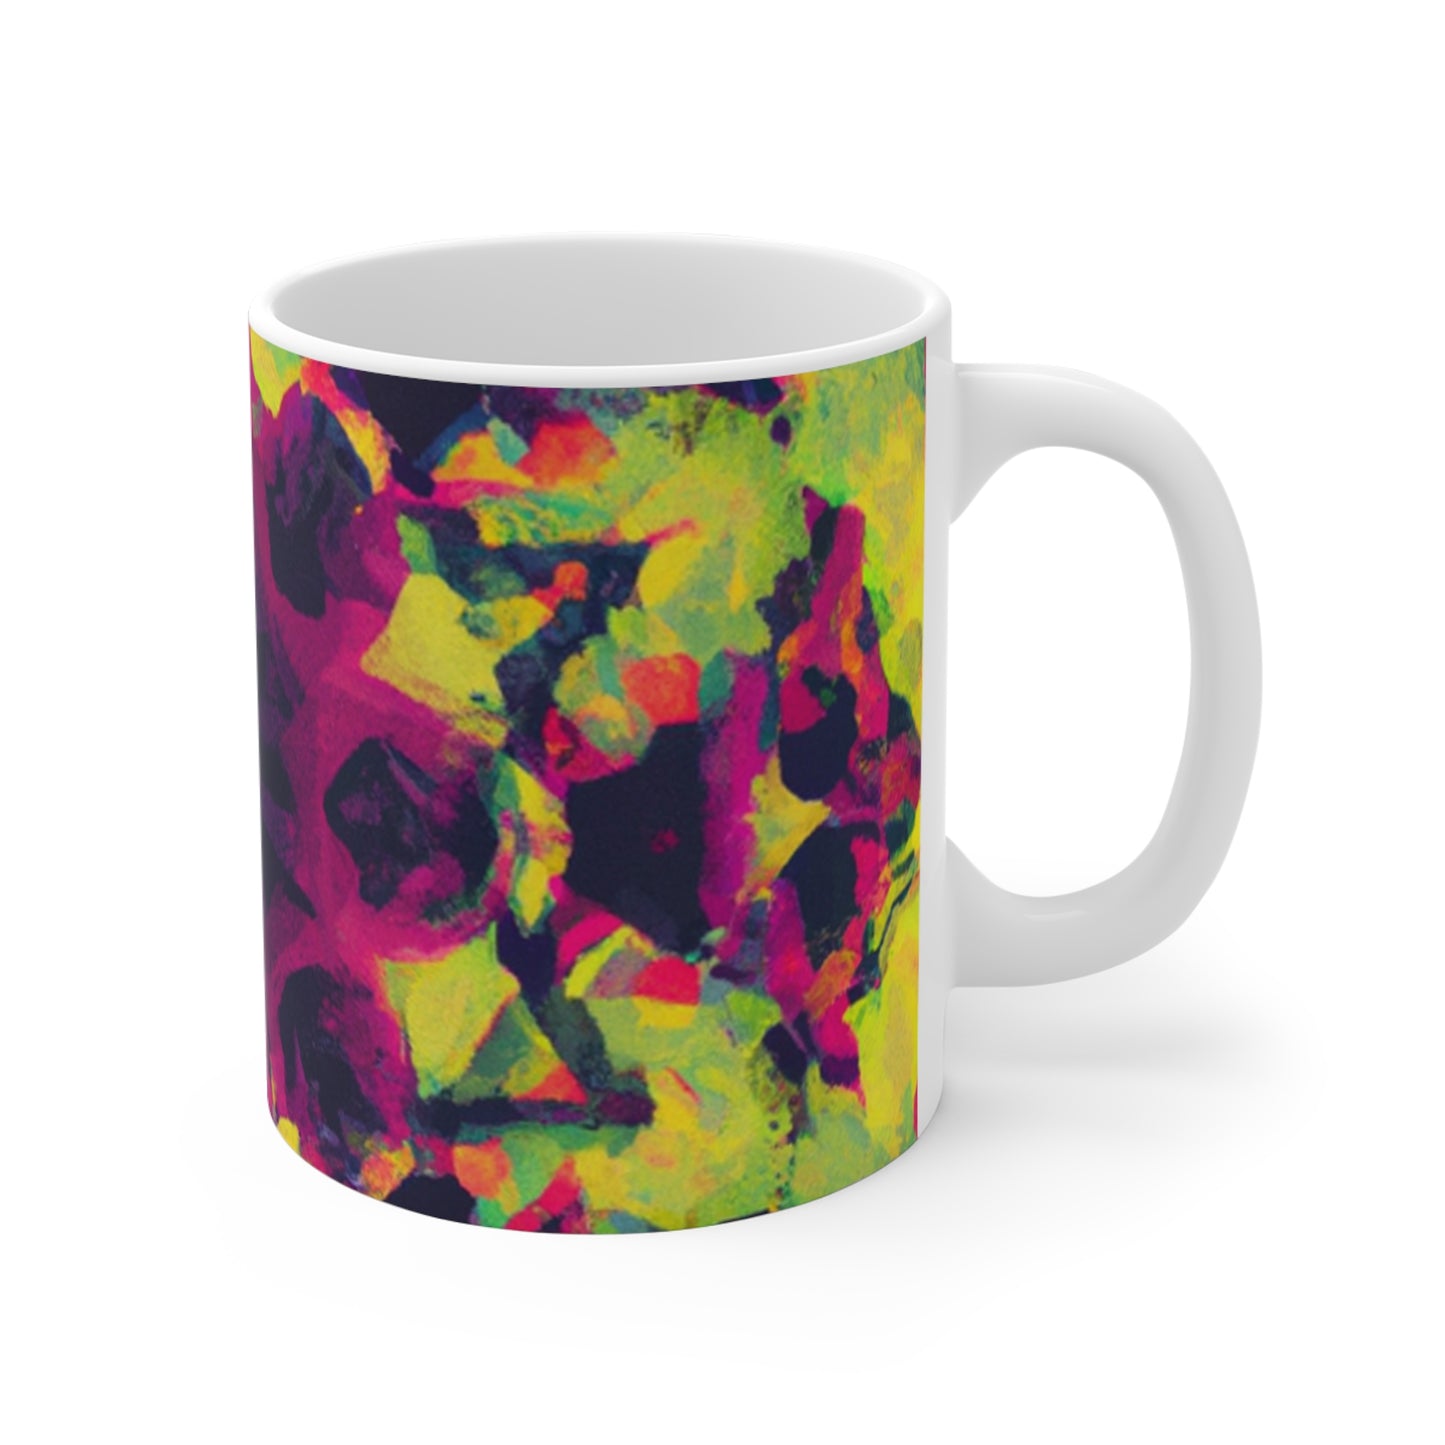 Perky Pete's Coffee - Psychedelic Coffee Cup Mug 11 Ounce